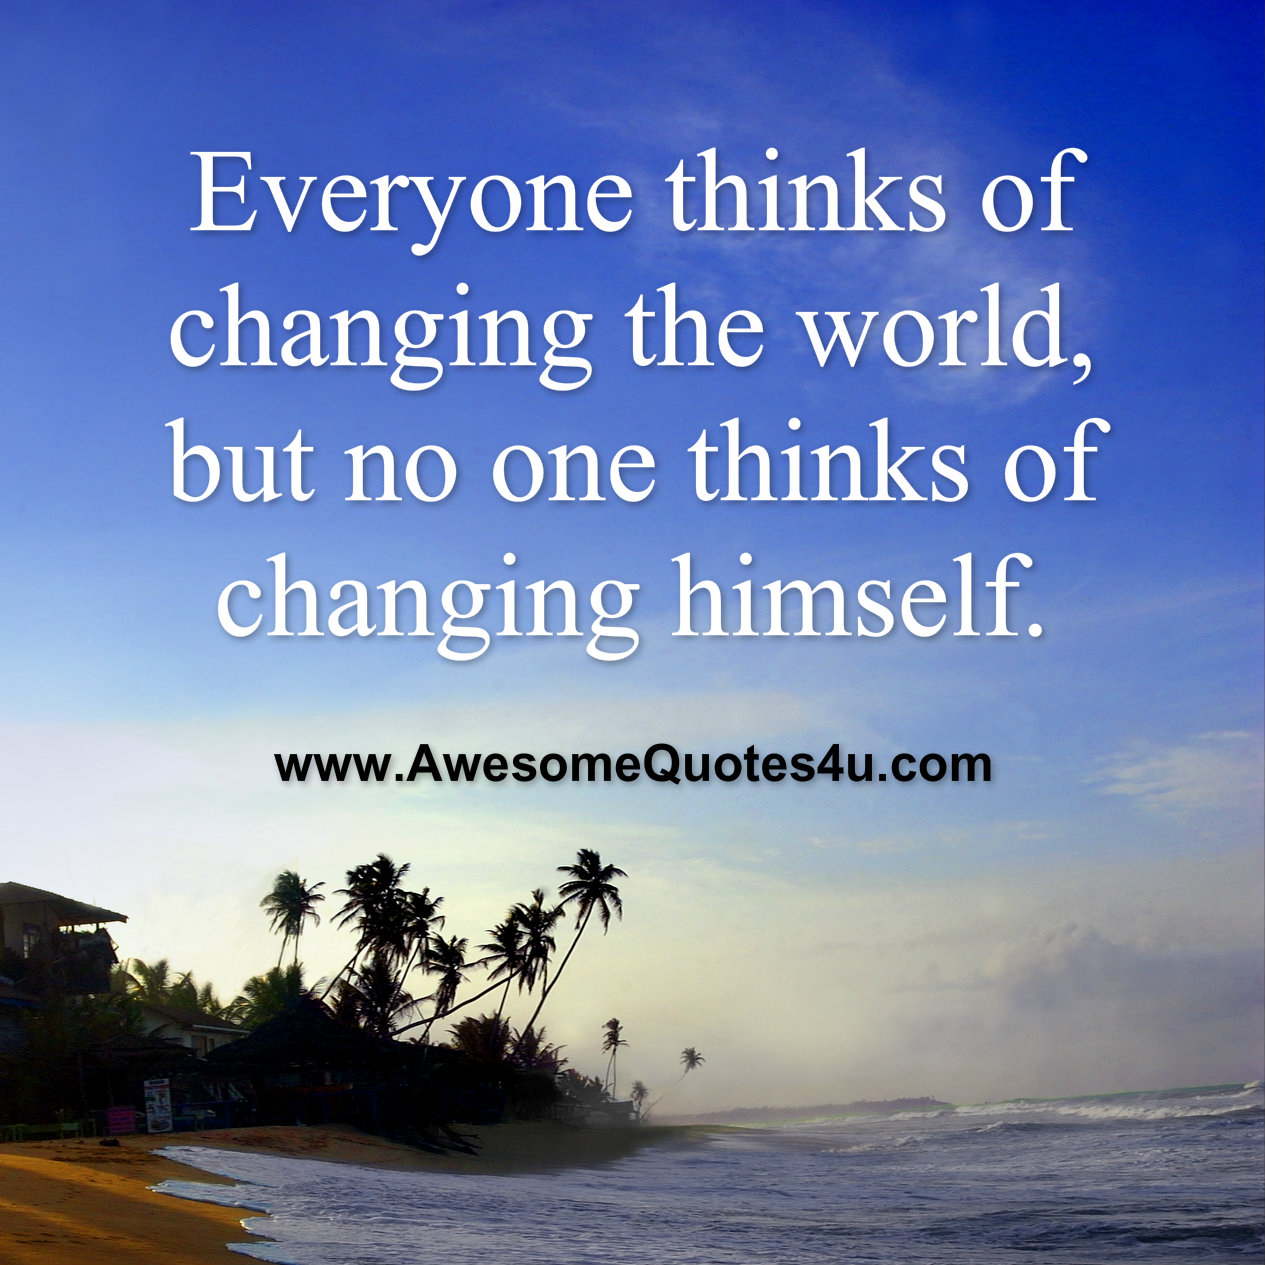 Awesome Quotes: Everyone thinks of changing the world,